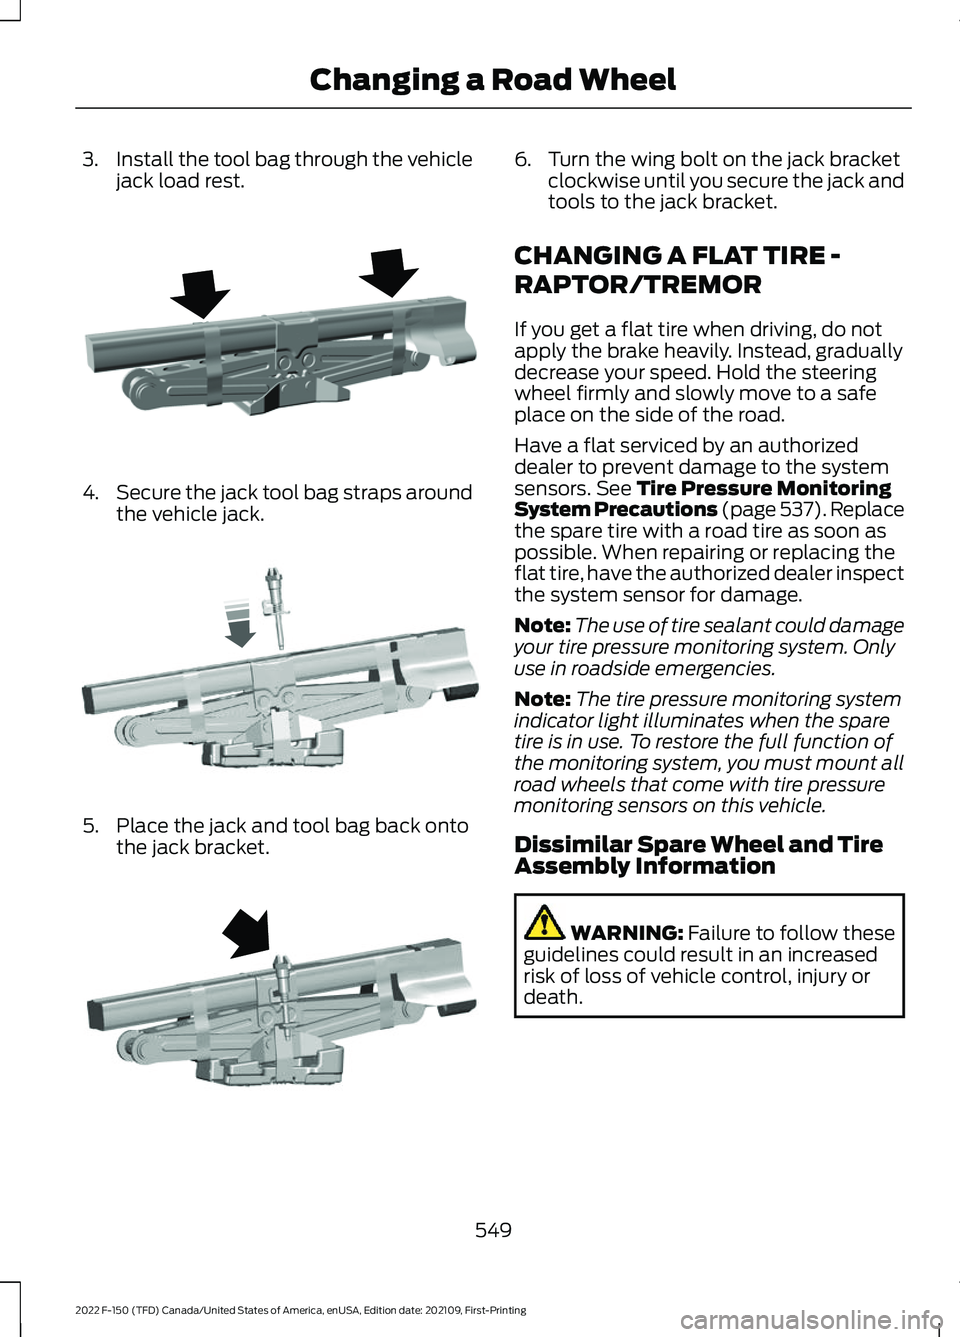 FORD F-150 2022  Owners Manual 3.
Install the tool bag through the vehicle
jack load rest. 4.
Secure the jack tool bag straps around
the vehicle jack. 5. Place the jack and tool bag back onto
the jack bracket. 6. Turn the wing bolt